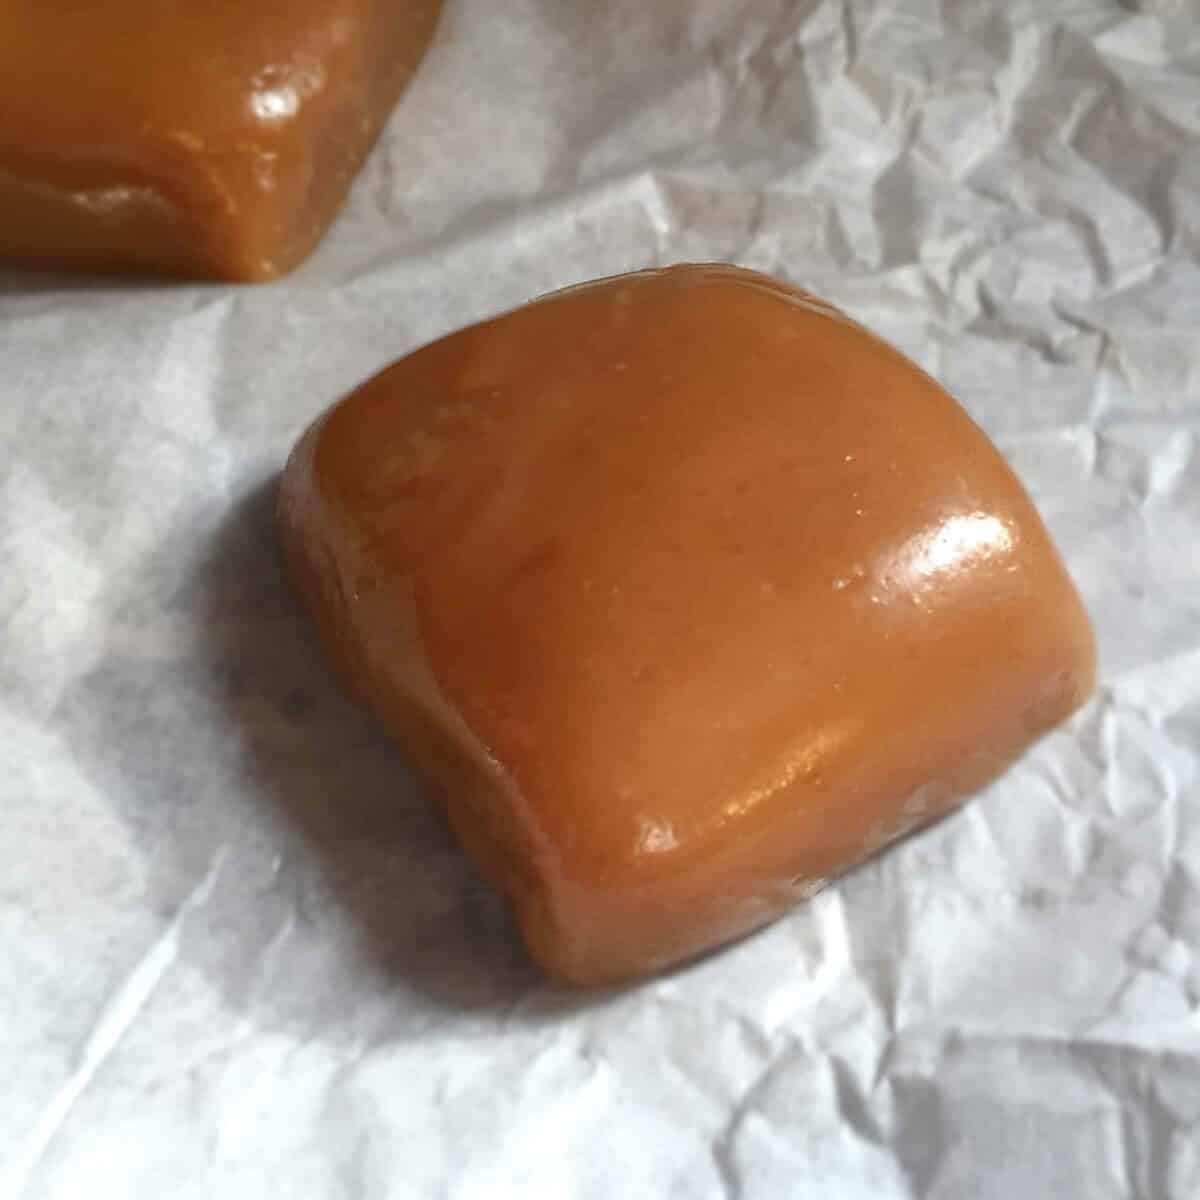  A batch of homemade vegan caramels: the ultimate gift idea